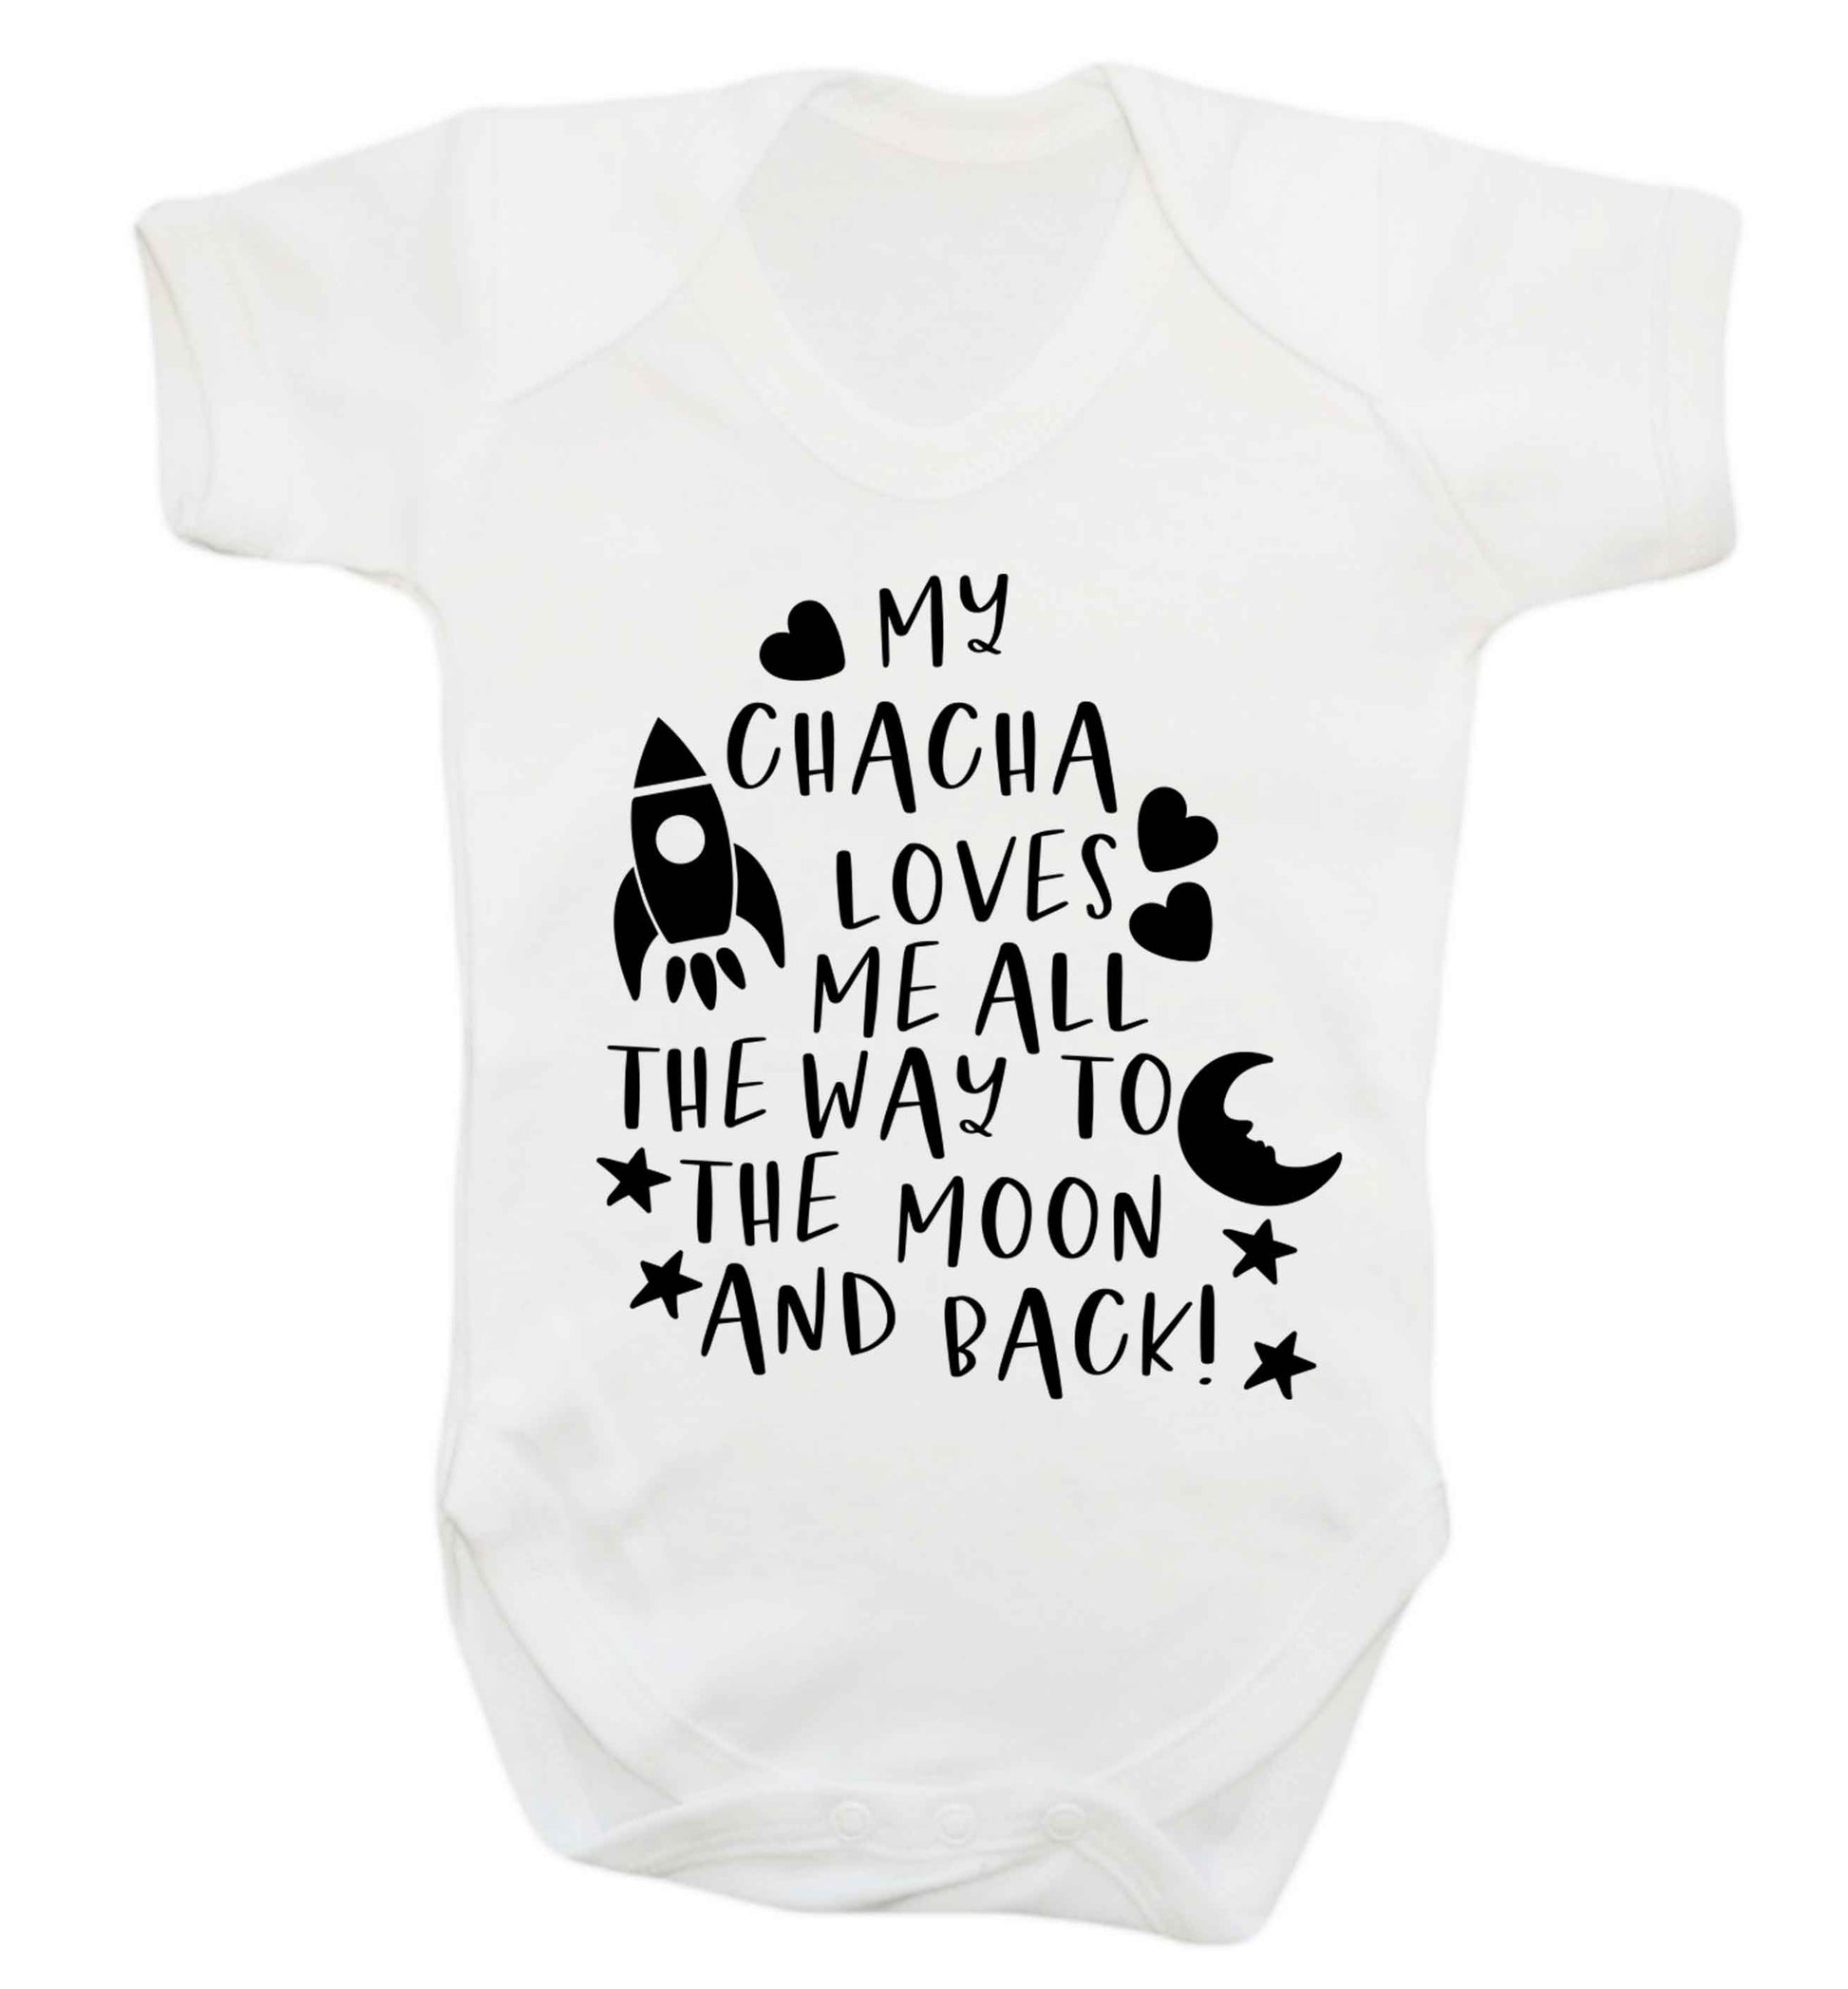 My chacha loves me all the way to the moon and back Baby Vest white 18-24 months